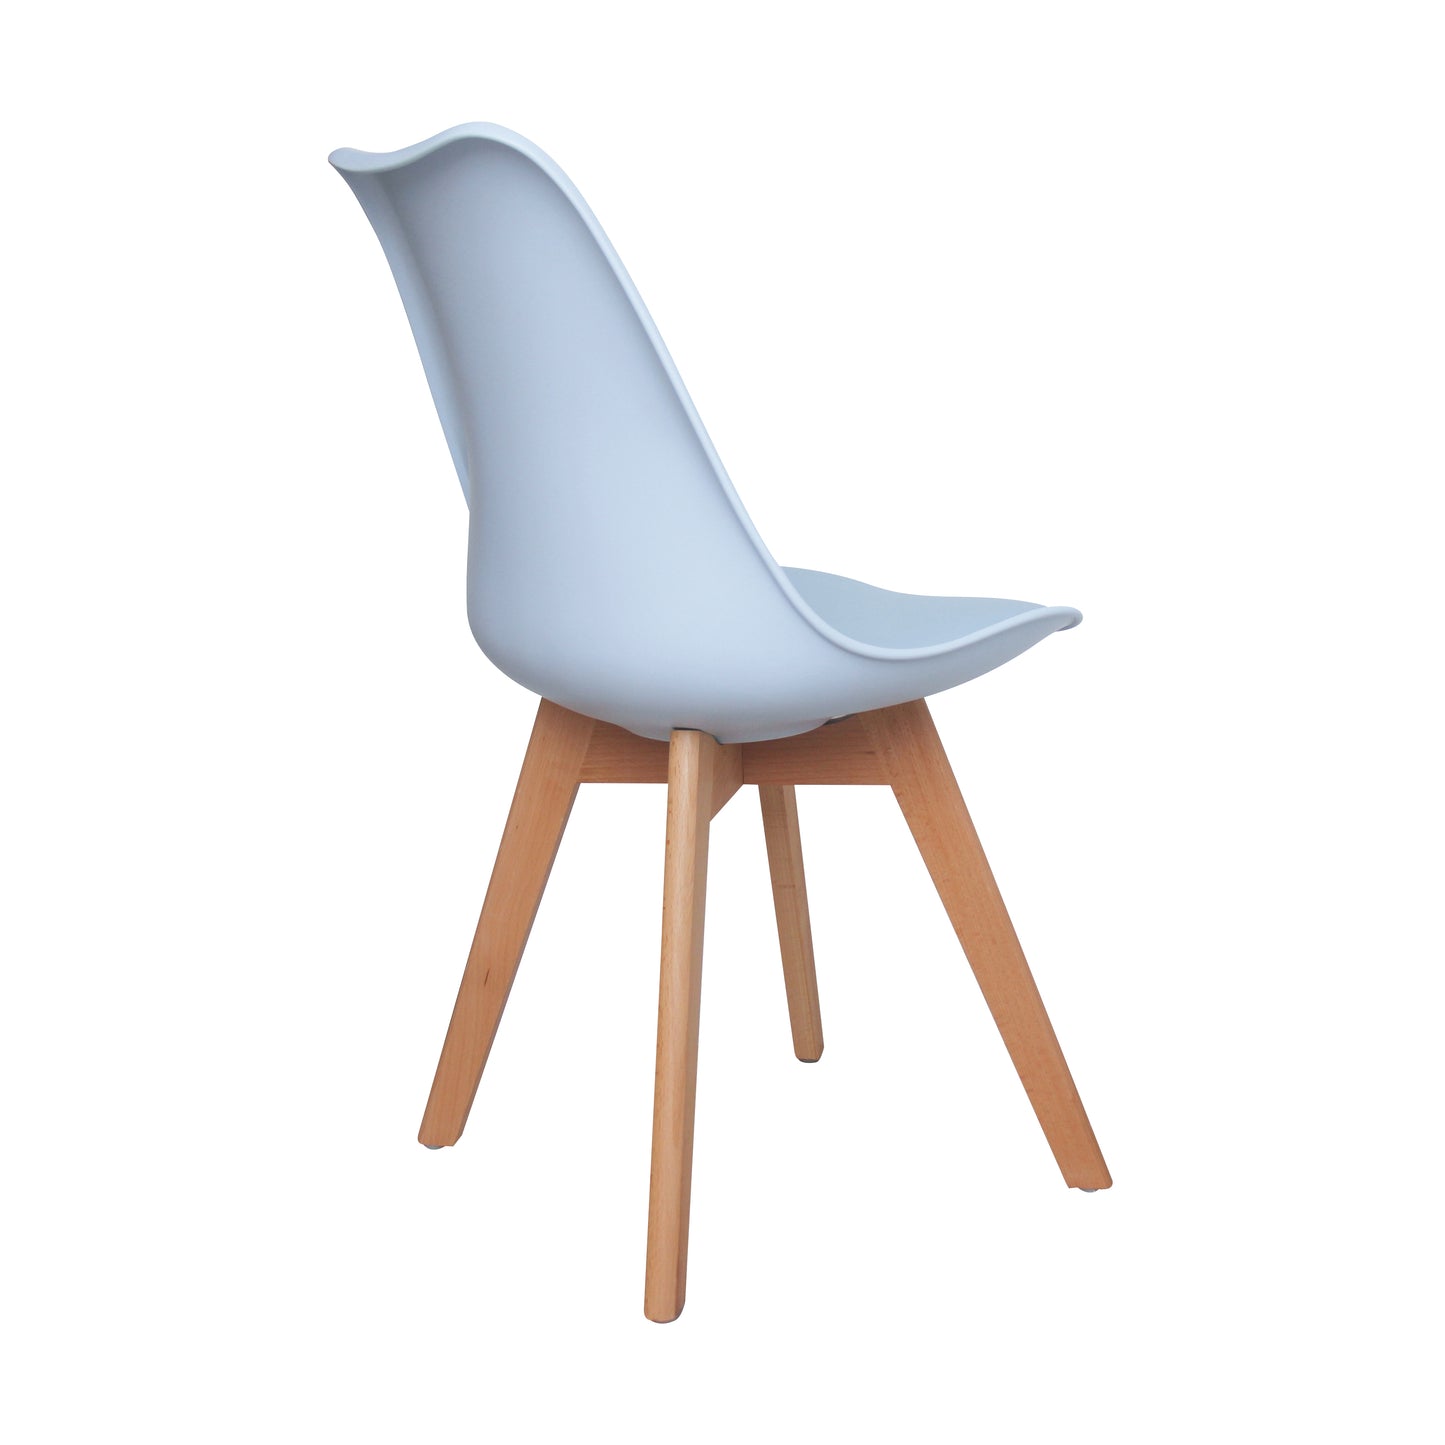 CHOTTO - Ando Dining Chairs - Baby Blue x 2